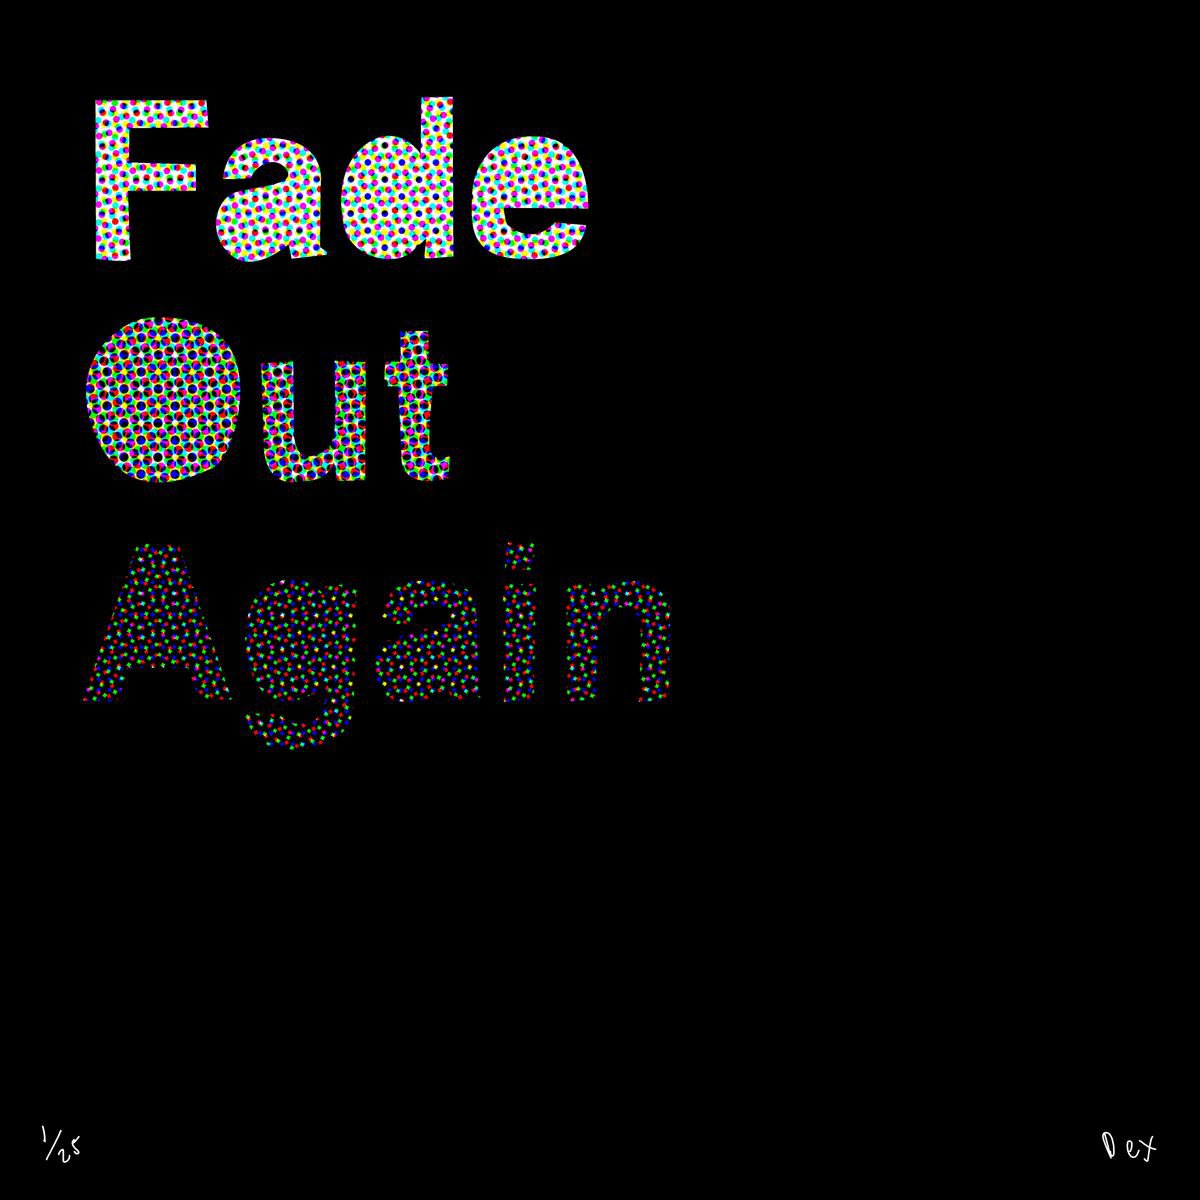 Fade Out Again by Dex